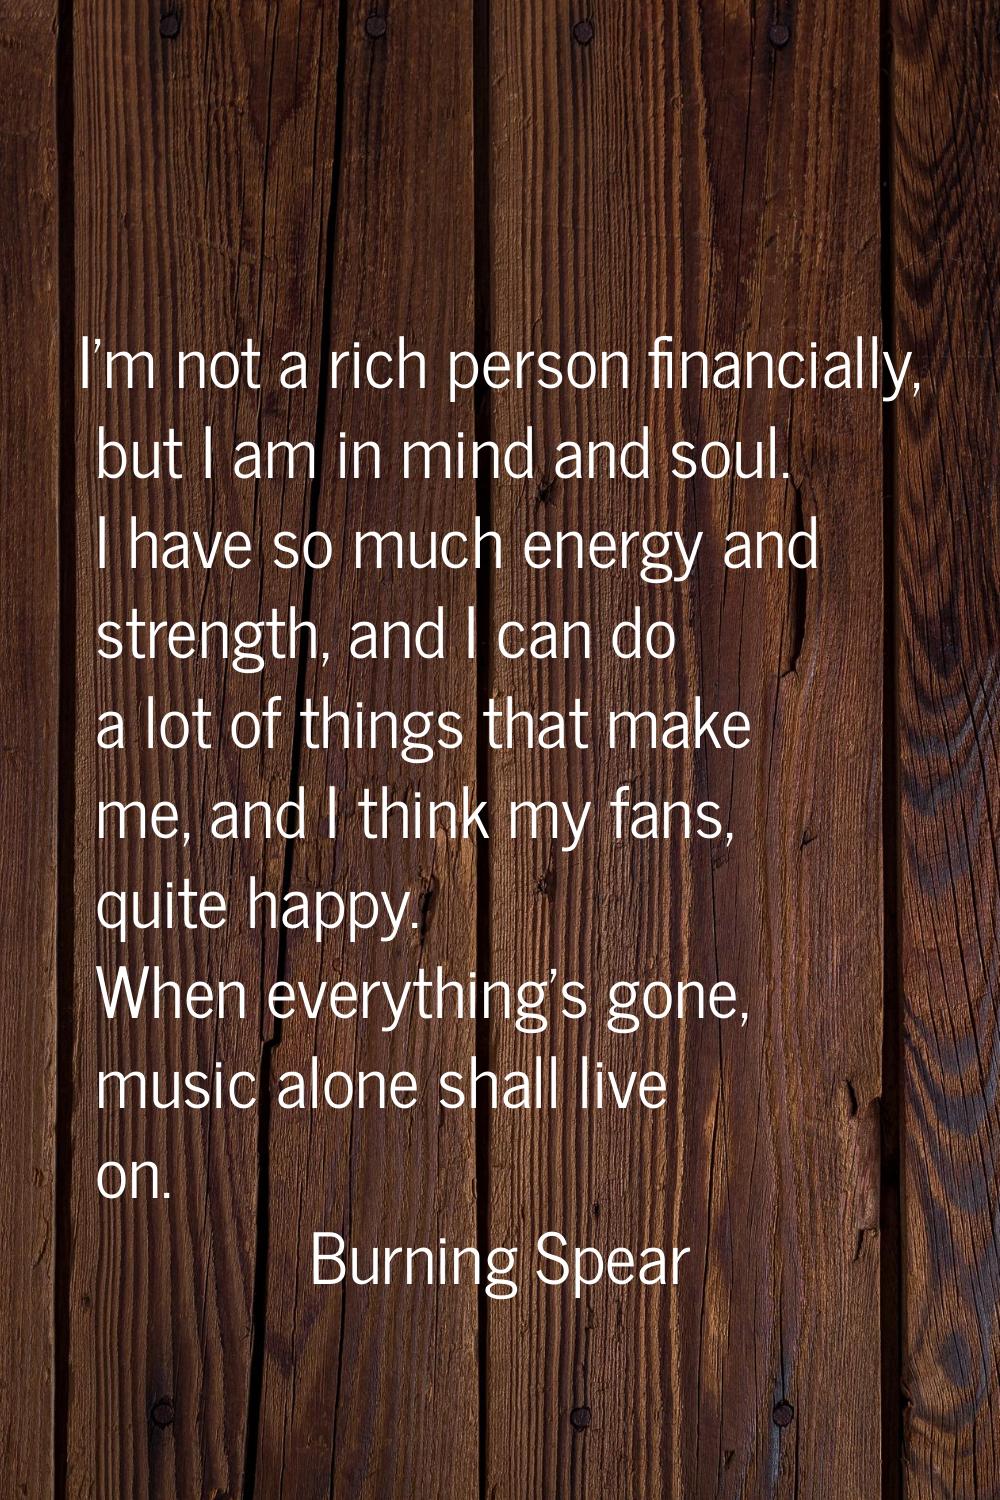 I'm not a rich person financially, but I am in mind and soul. I have so much energy and strength, a